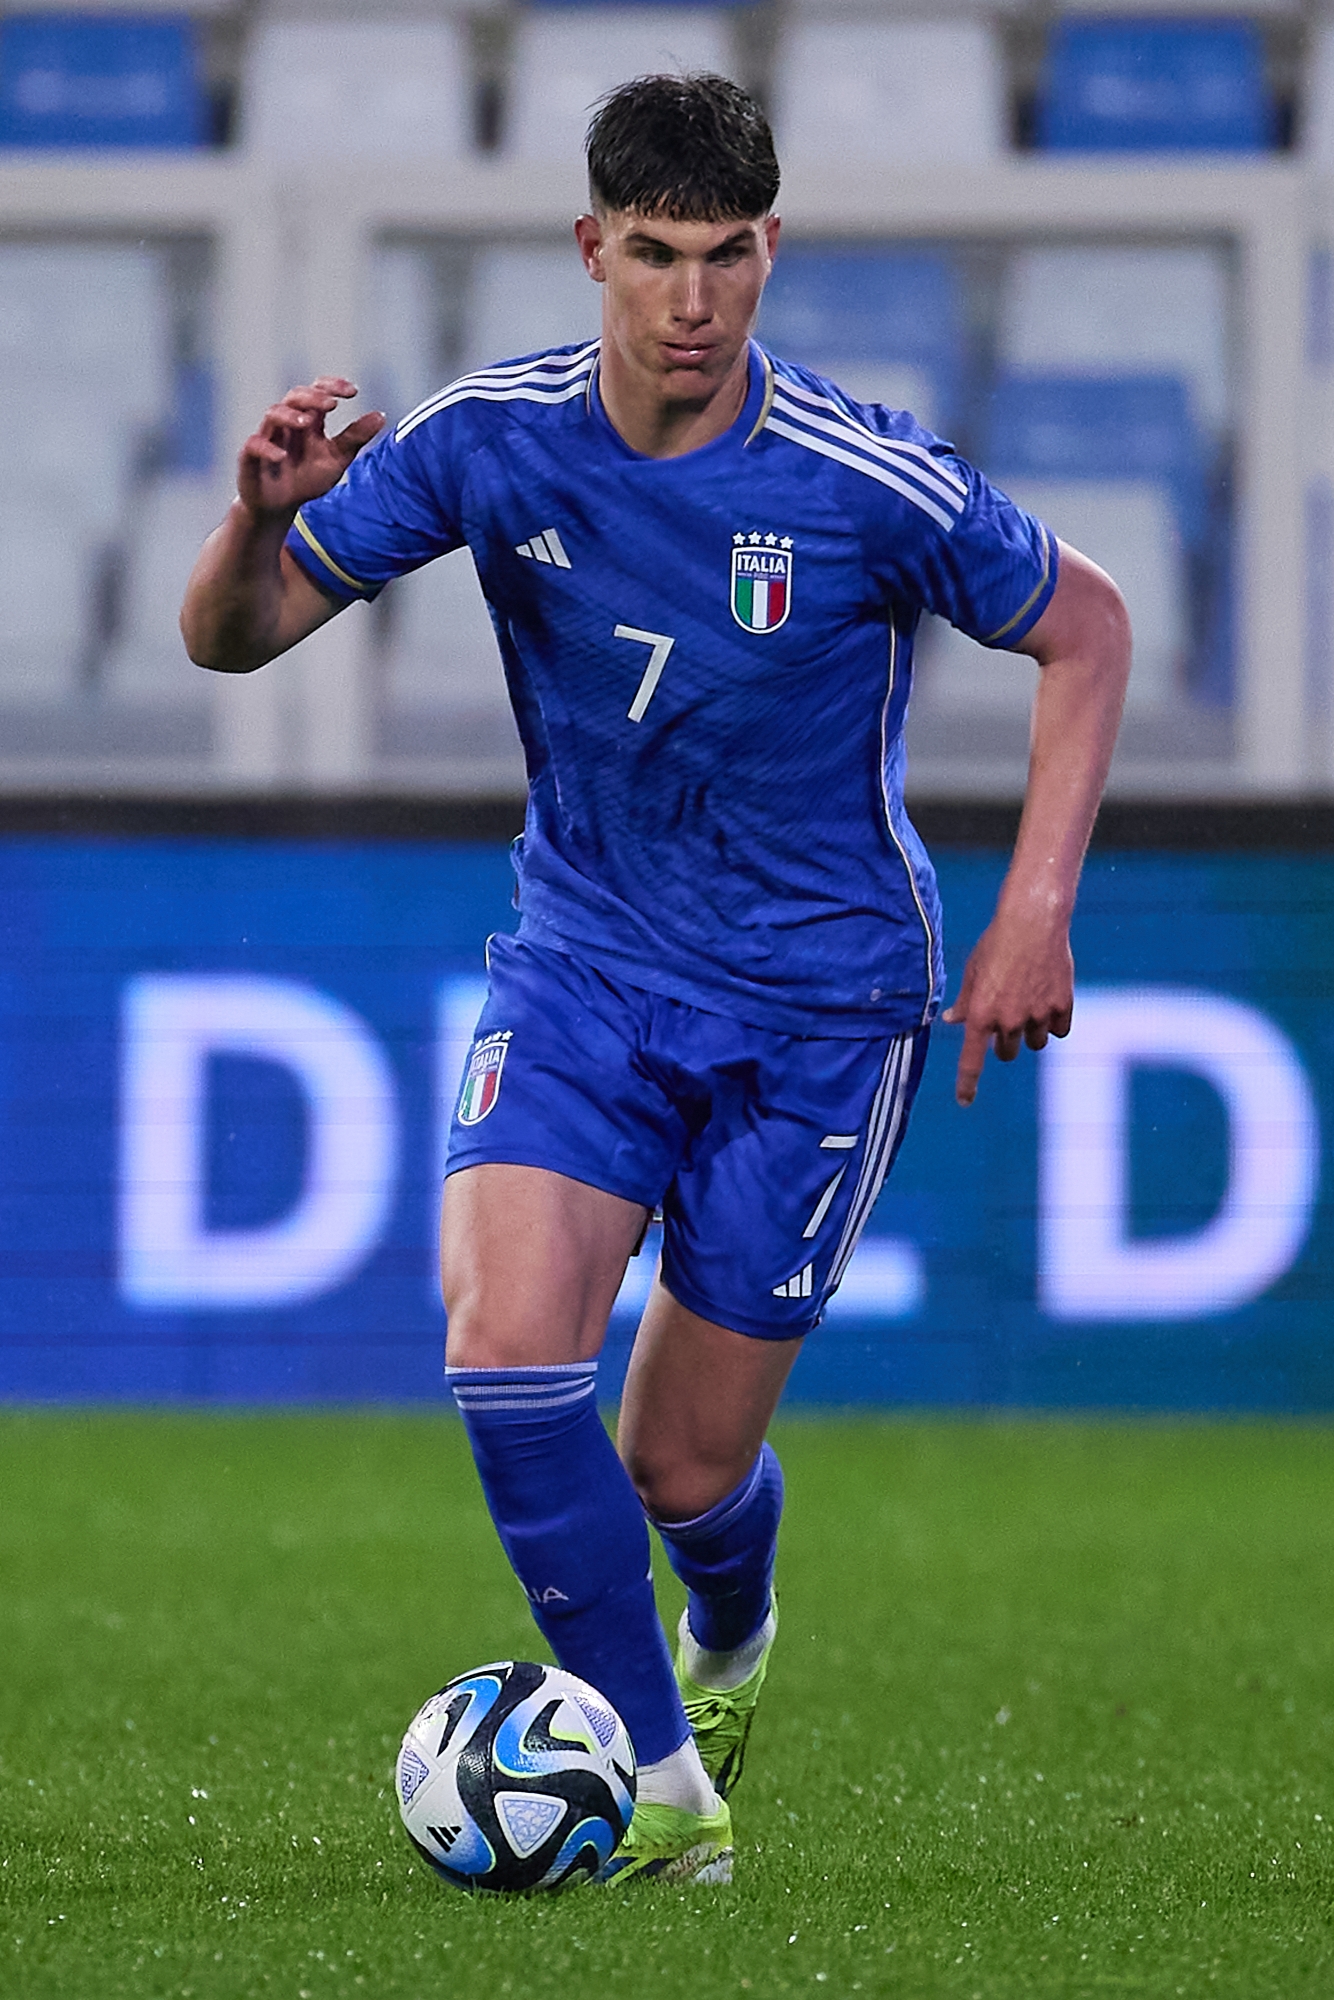 FERRARA, ITALY - MARCH 26: Cesare Casadei of Italy in action during the UEFA U21 Euro 2025 Qualifier match between Italy and Turkey at Stadio Paolo Mazza on March 26, 2024 in Ferrara, Italy. (Photo by Emmanuele Ciancaglini/Ciancaphoto Studio/Getty Images)